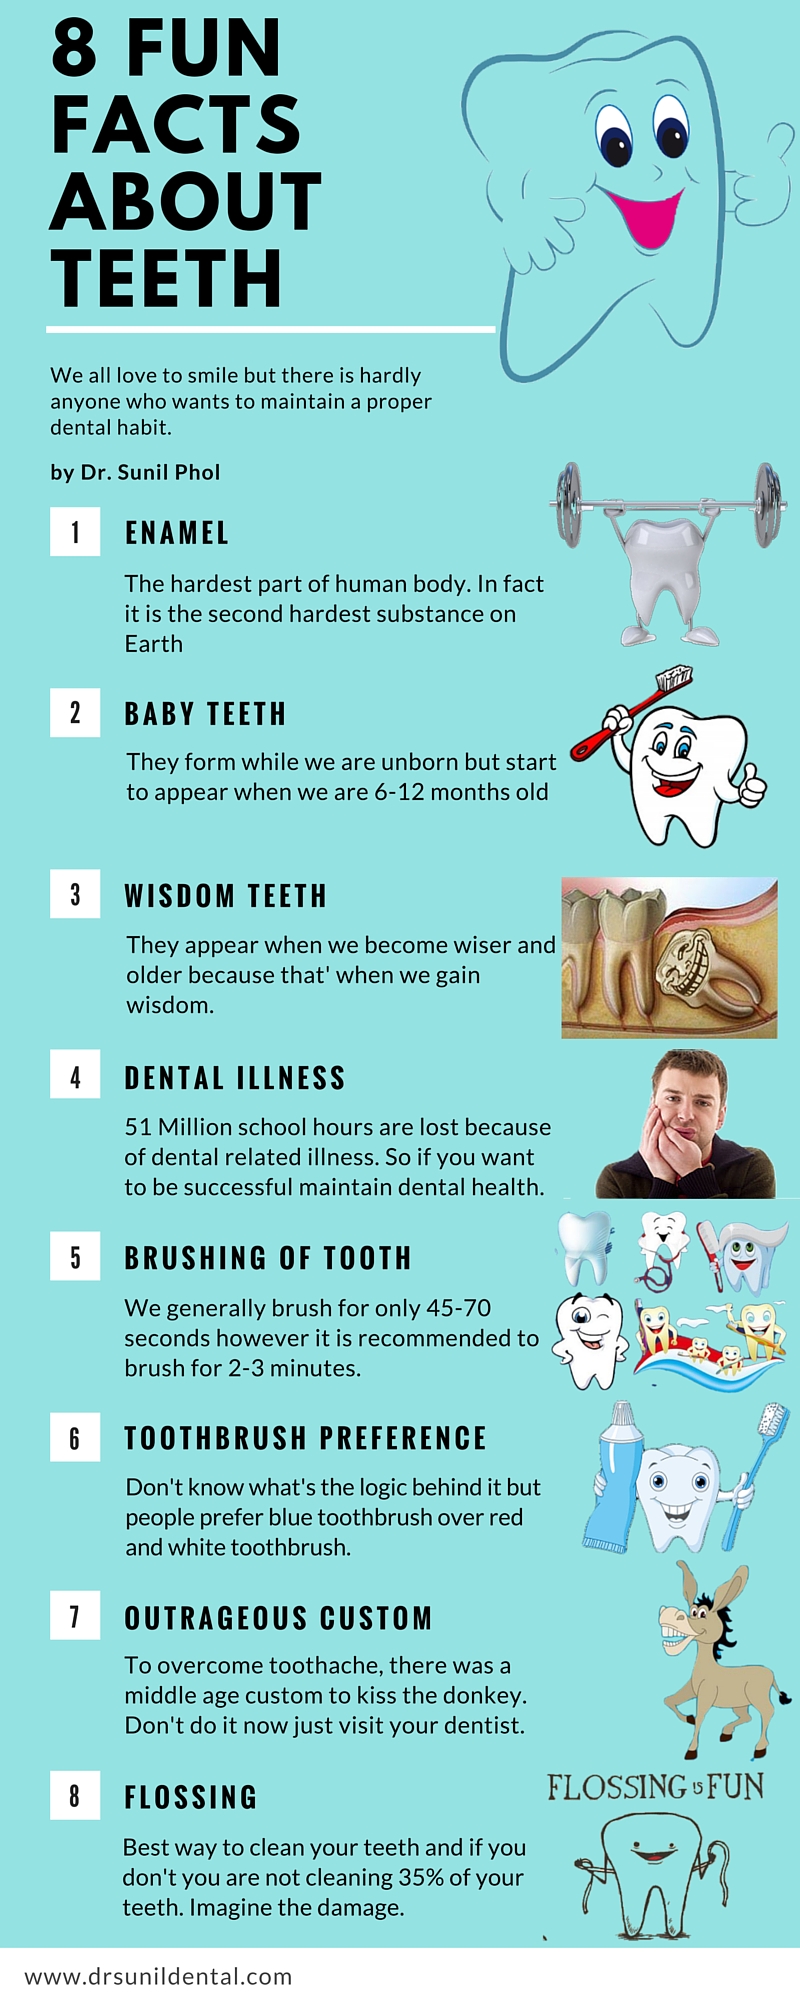 8 Fun facts about teeth